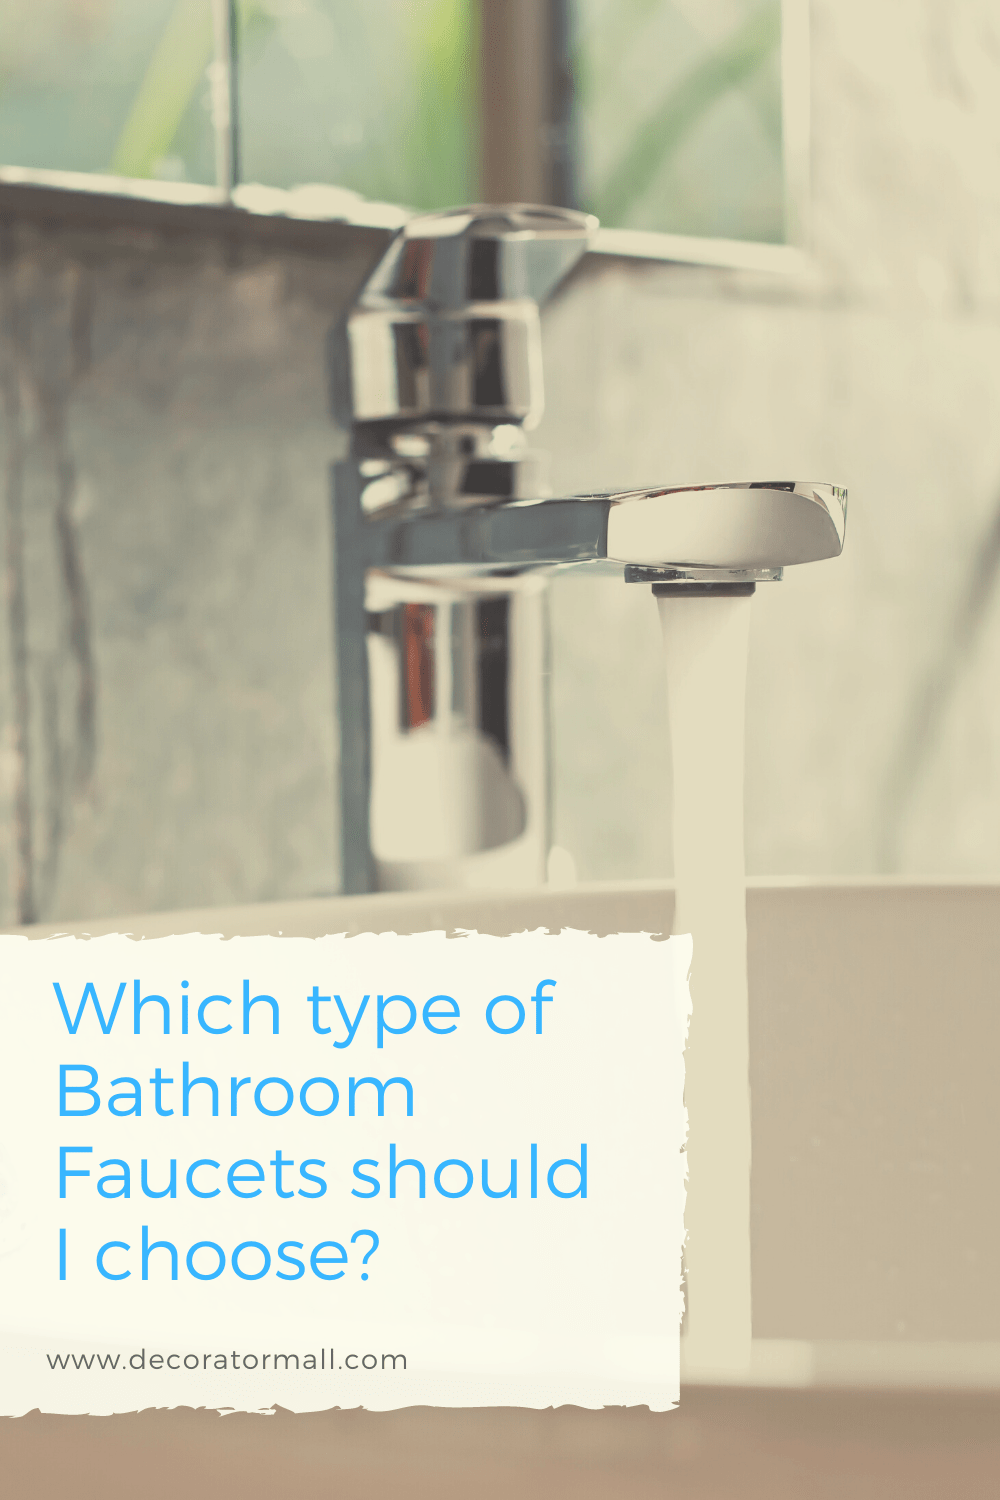 Which type of Bathroom Faucets should I choose